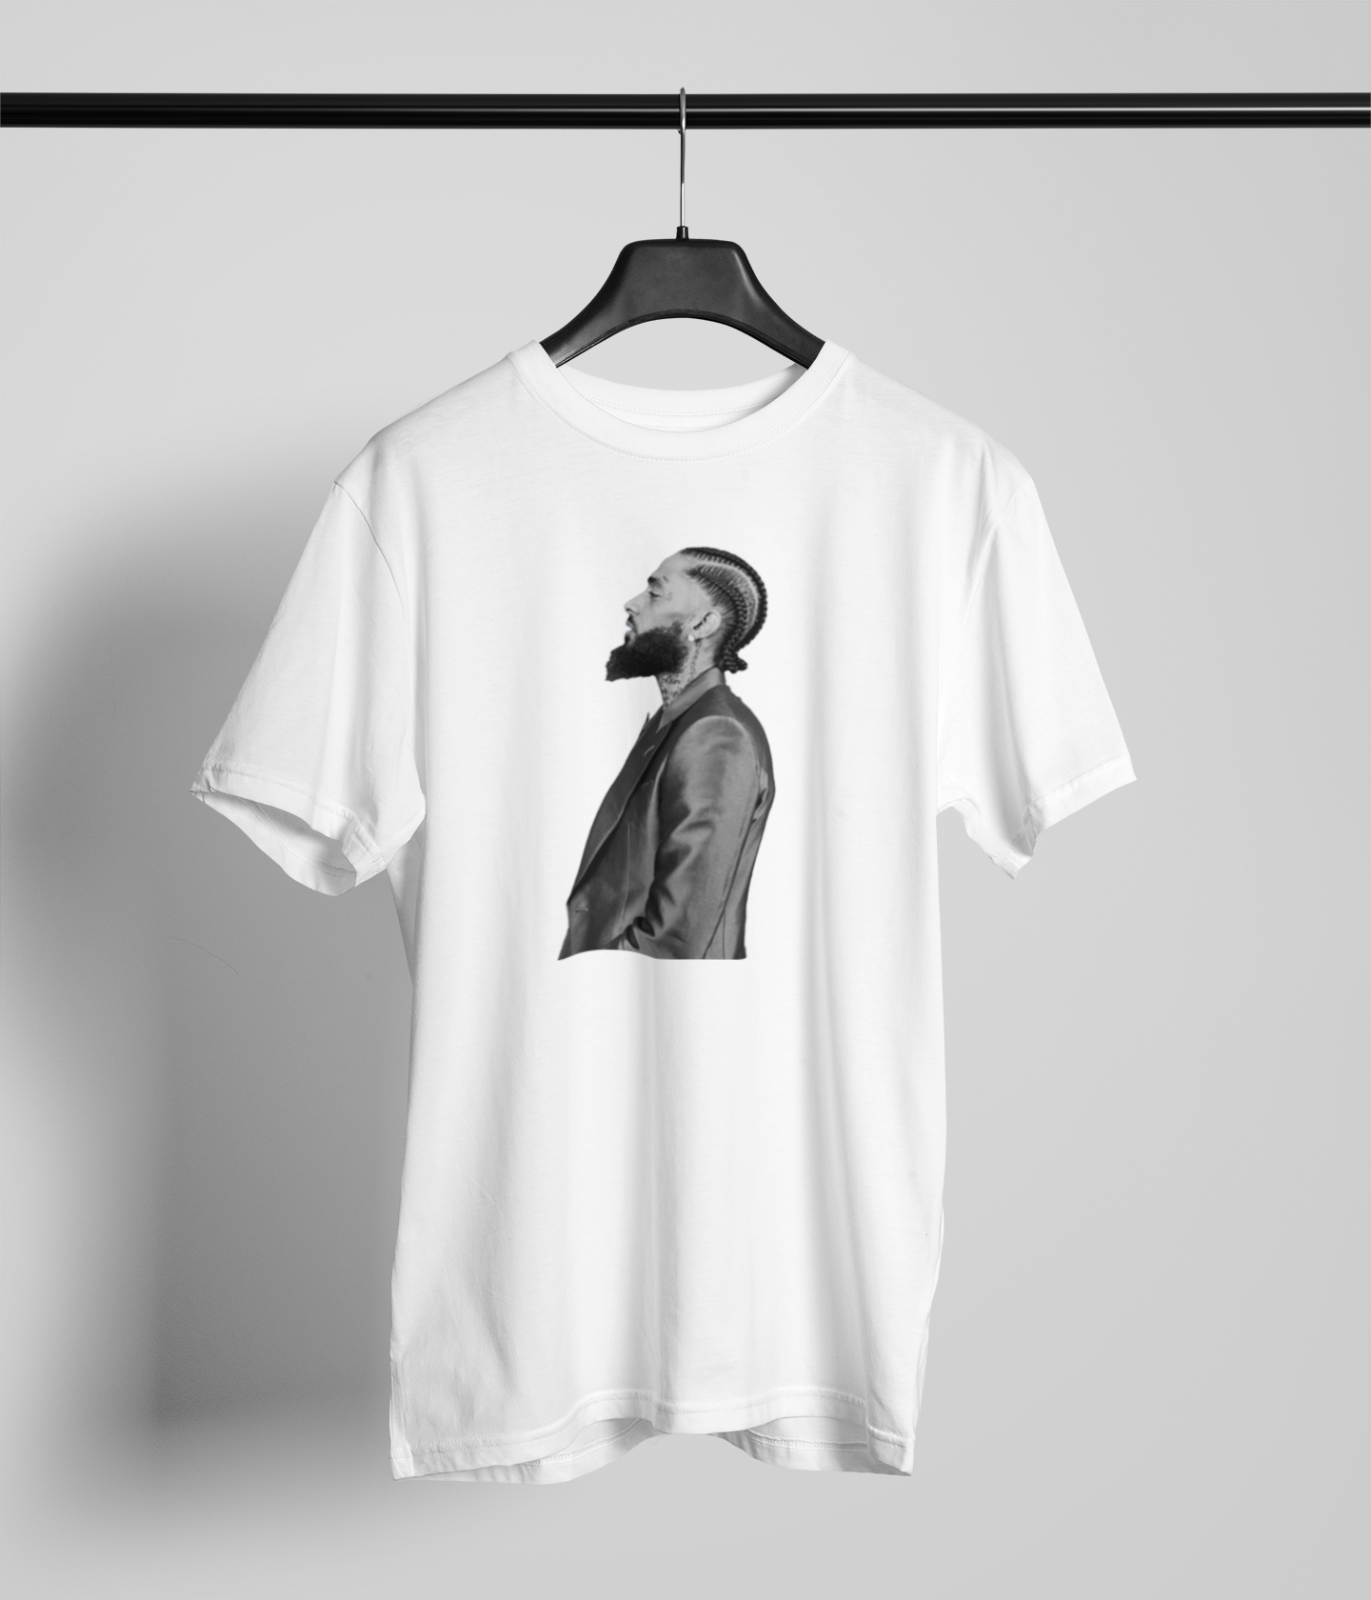 90s Teez - Nipsey hussle graphic tee, women, multiple colors available